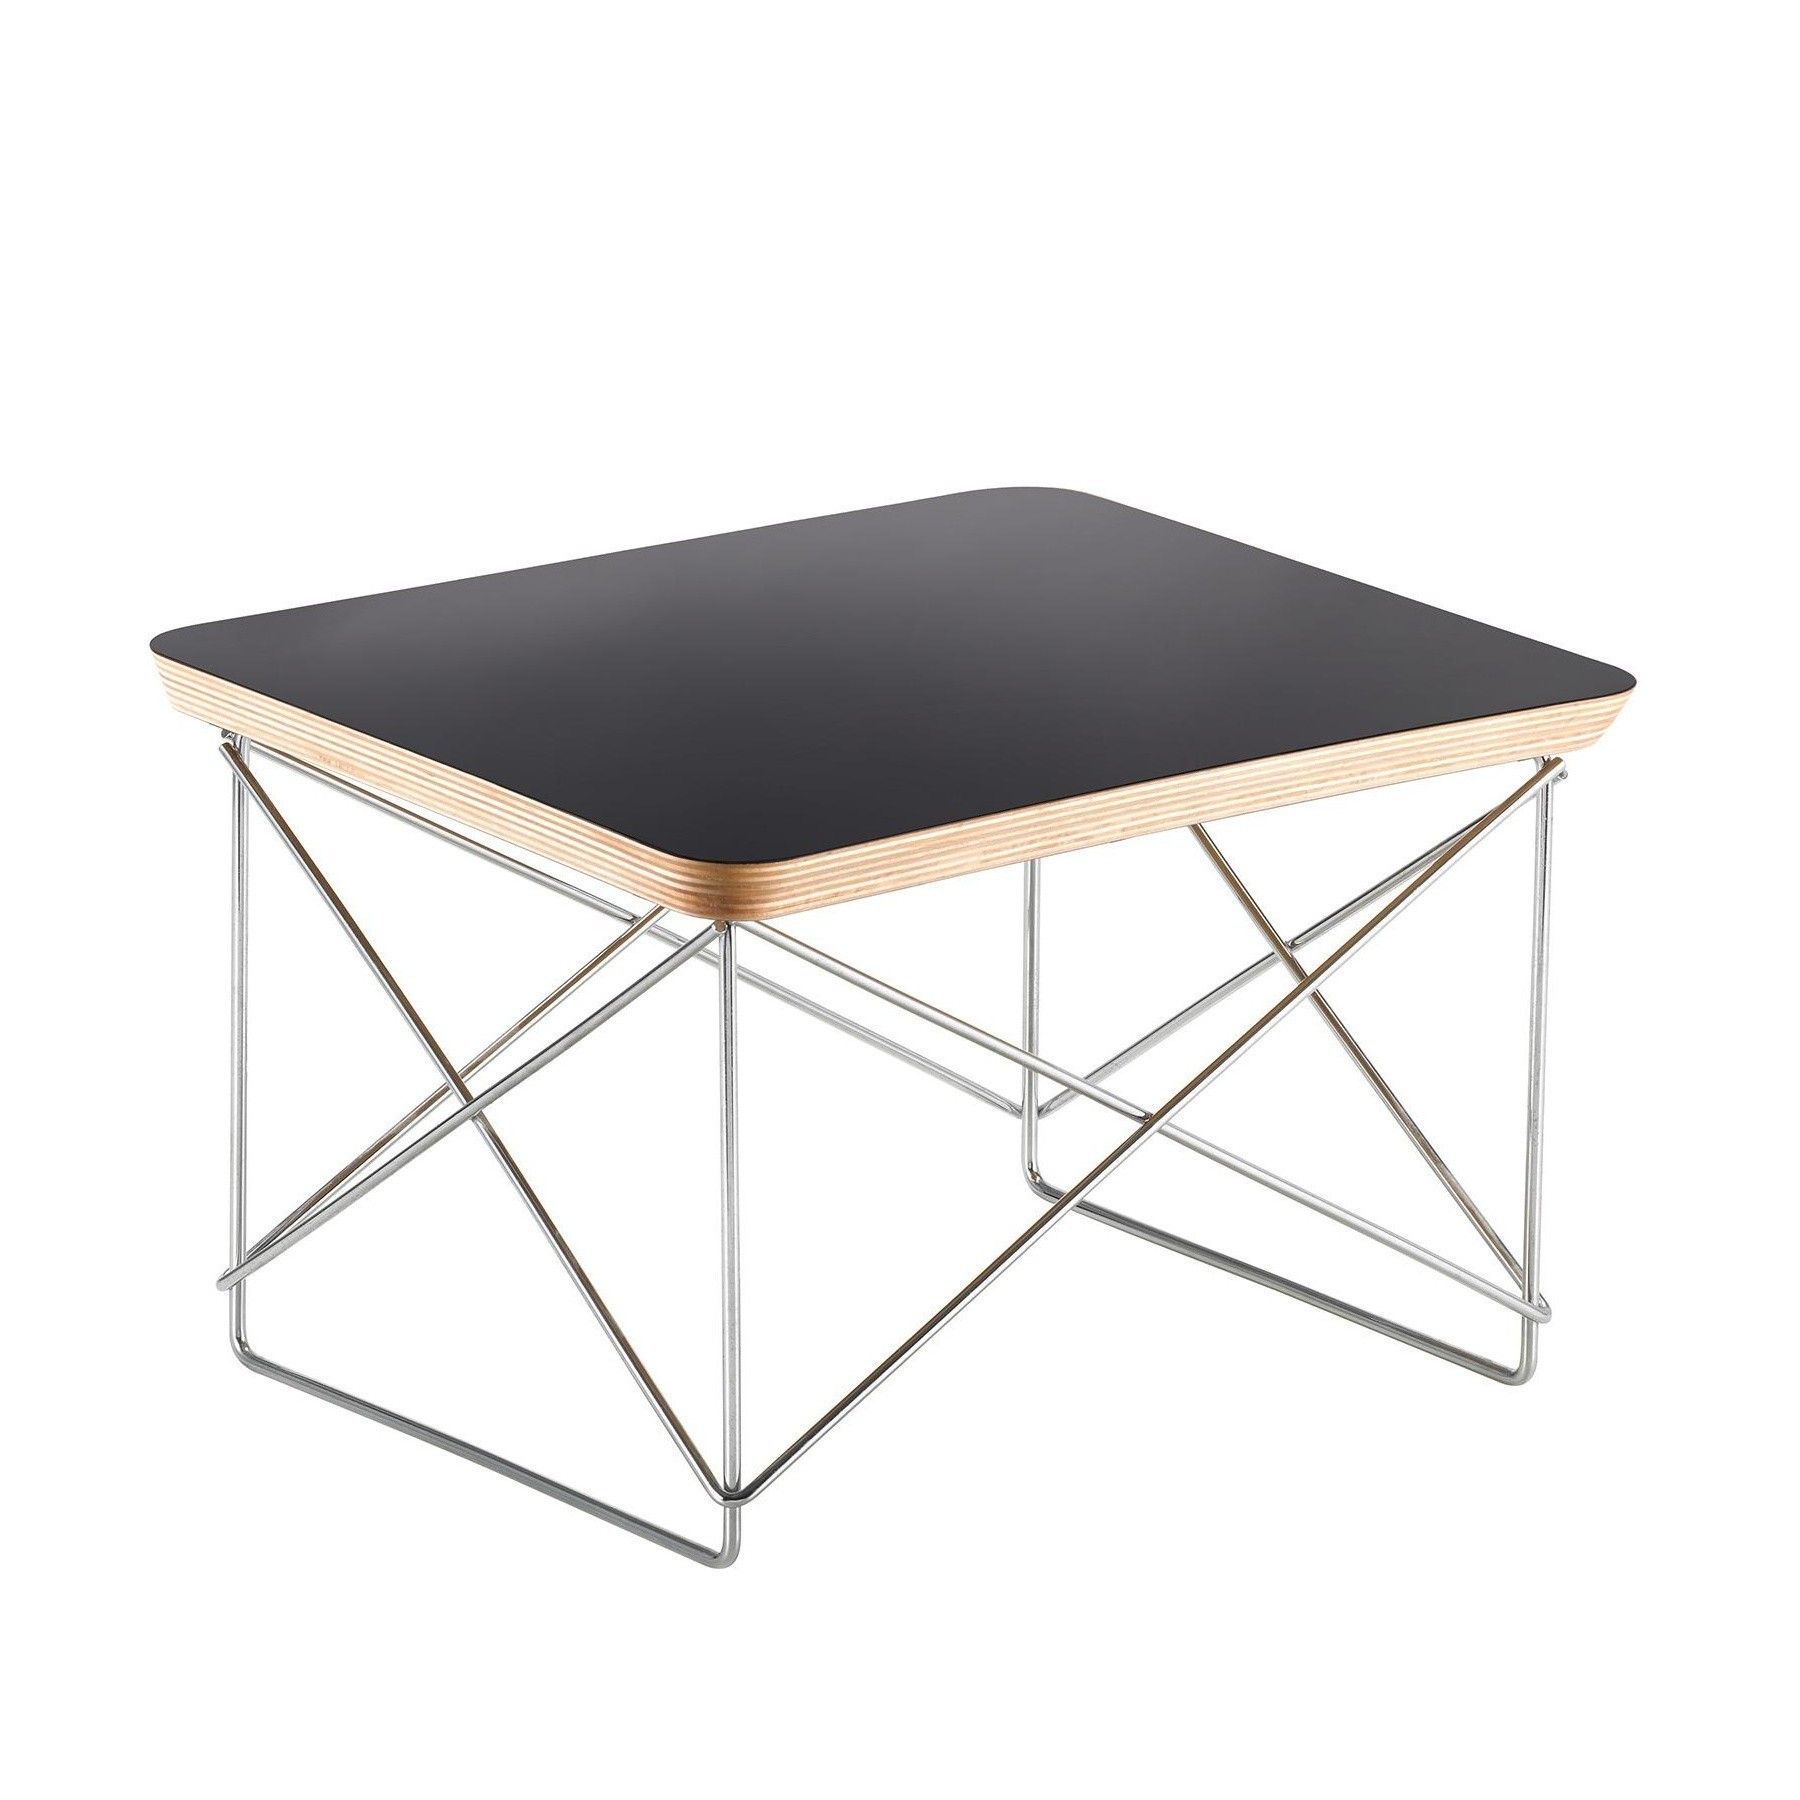 Vitra Occasional Table Ltr Coffee Table | Deplain Pertaining To Occasional Coffee Tables (Gallery 16 of 20)